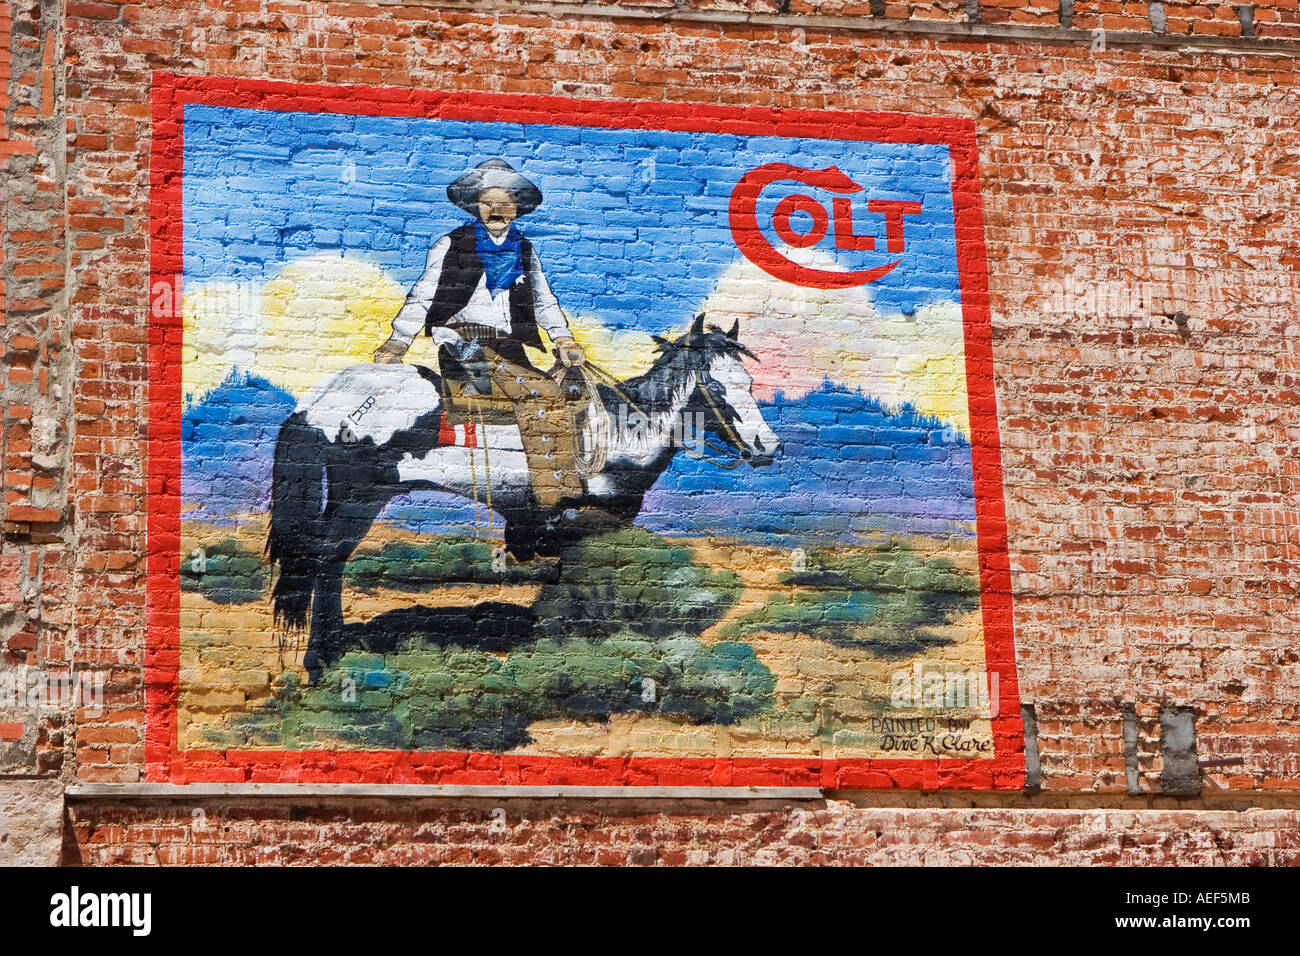 Painting of a cowboy wearing a Colt gun in Cripple Creek Colorado USA June 2006 Stock Photo